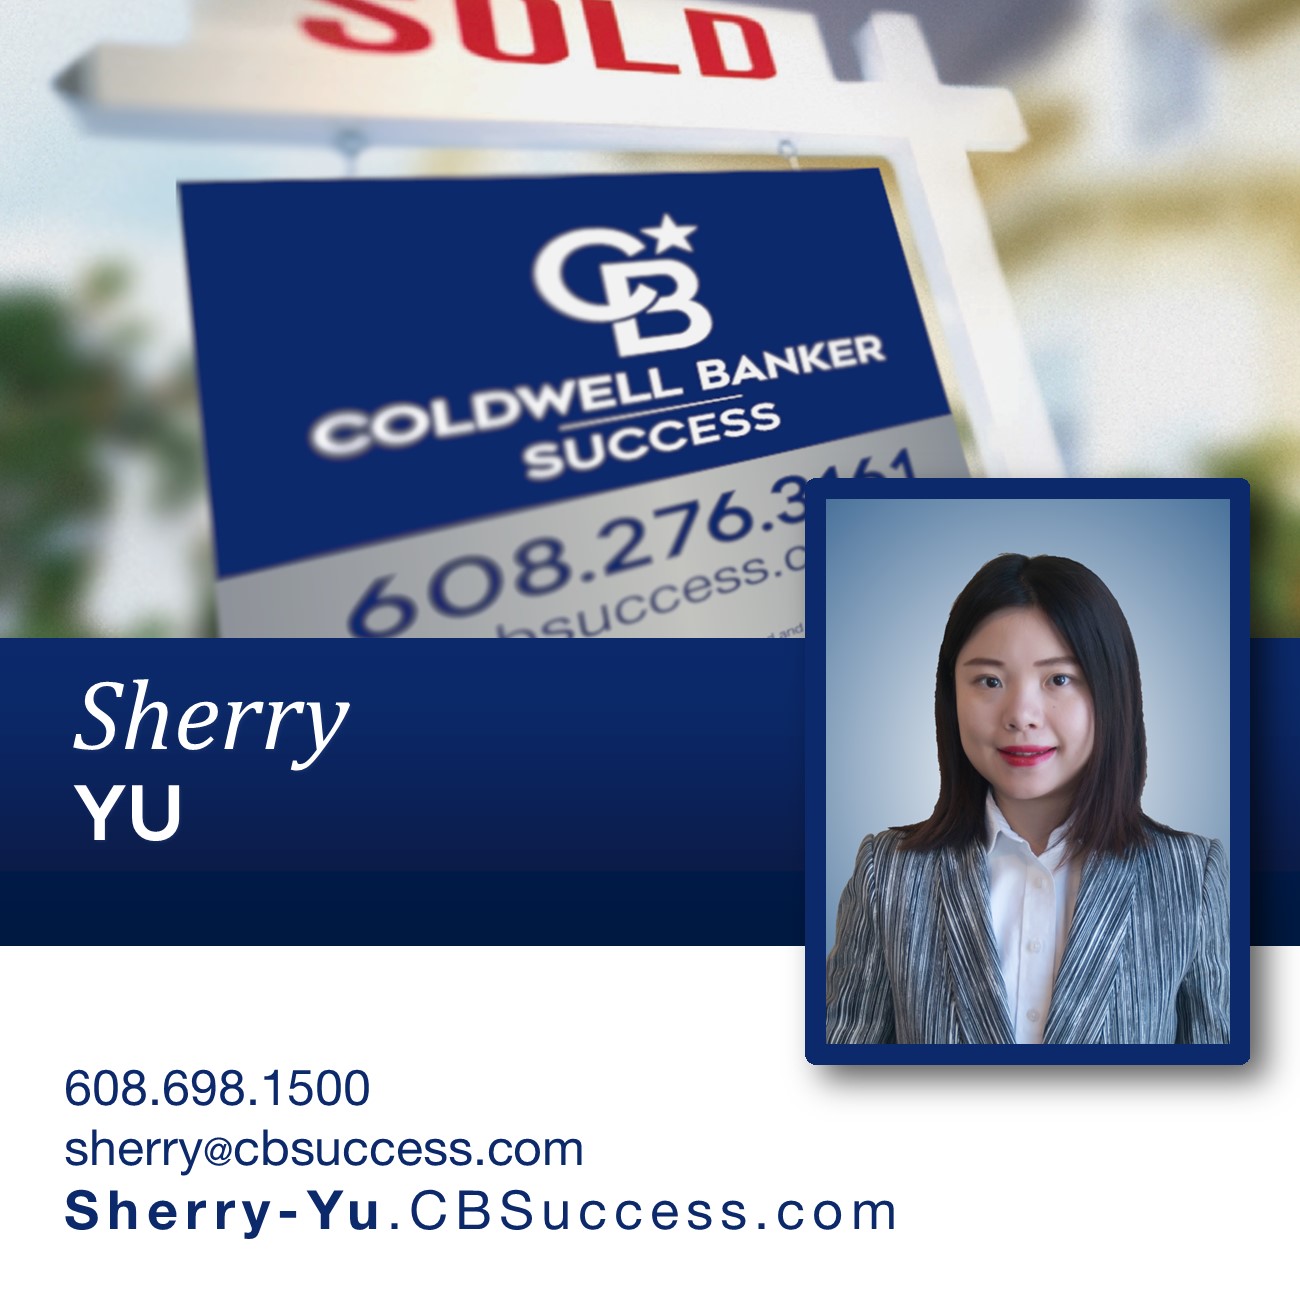 Sherry Yu is a Great Agent to Work With